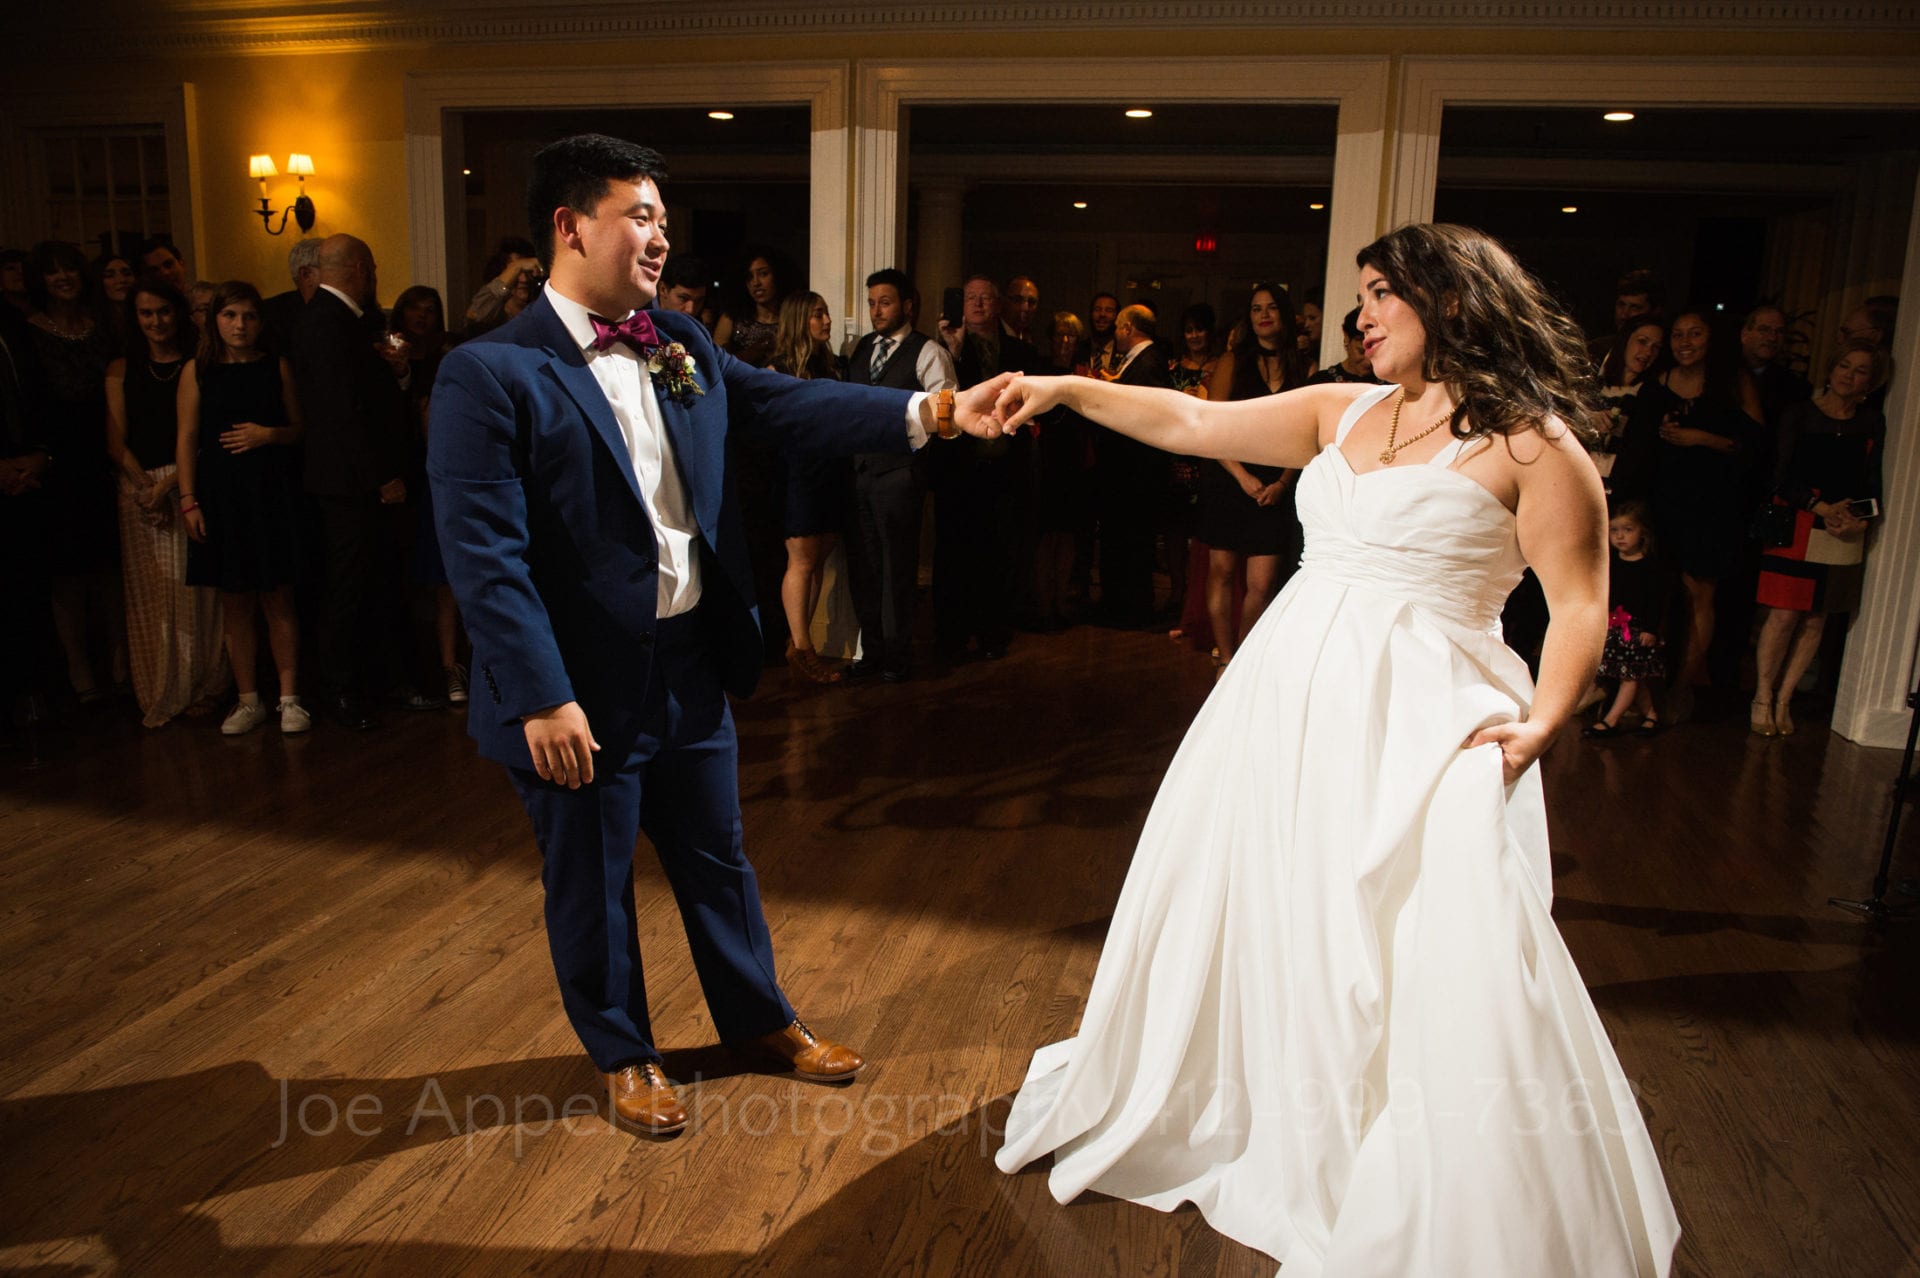 a bride and groom sing and dance while guests watch